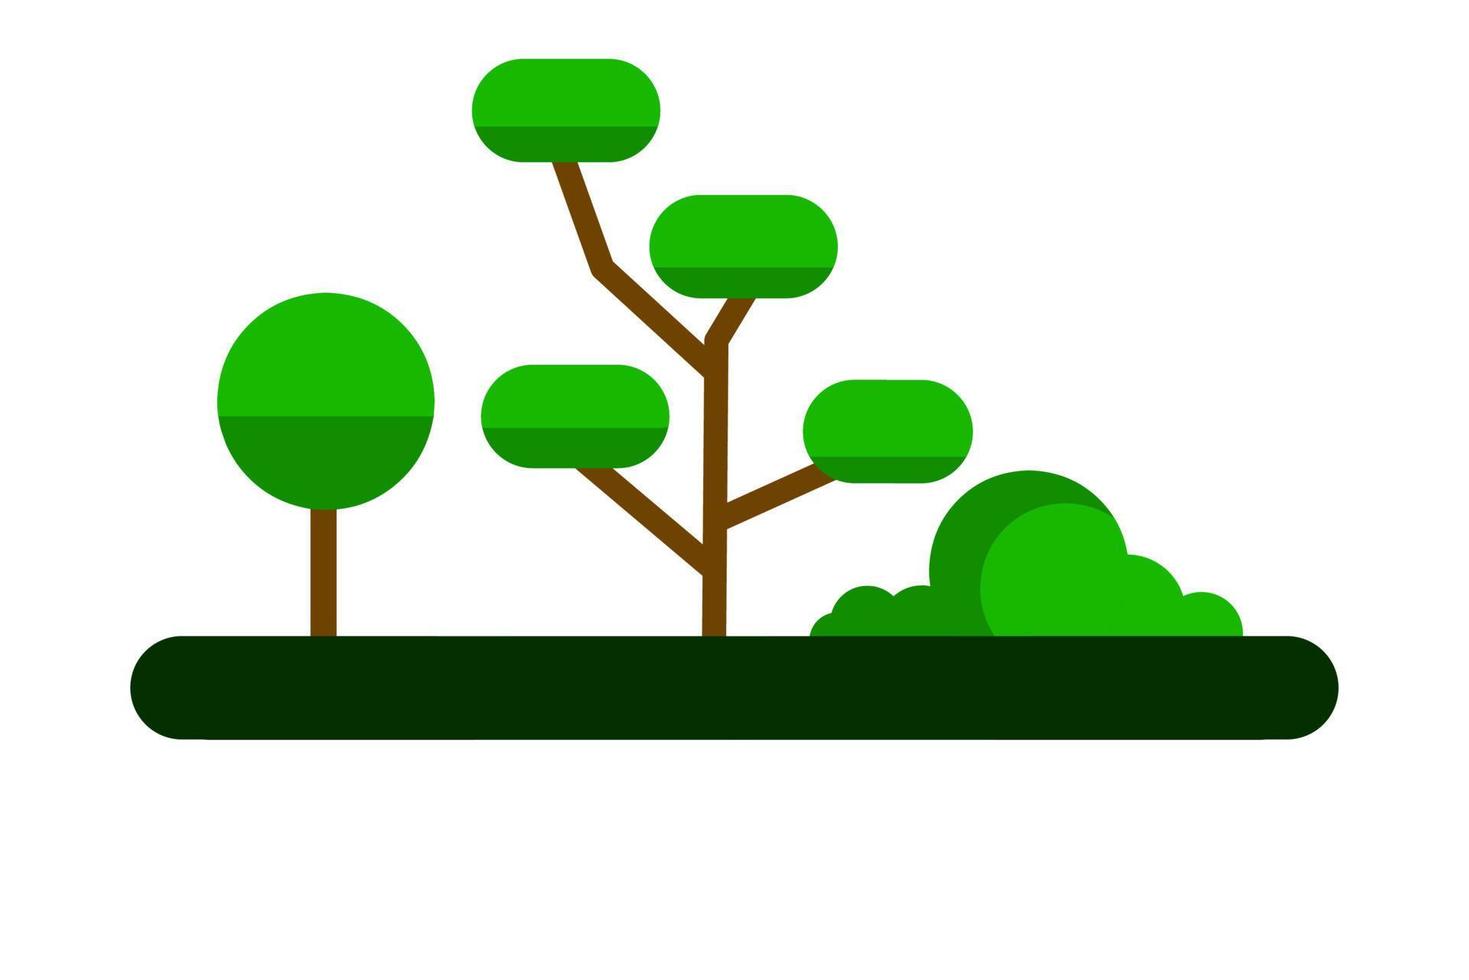 Forest design illustration, simple forest icon with elegant concept vector